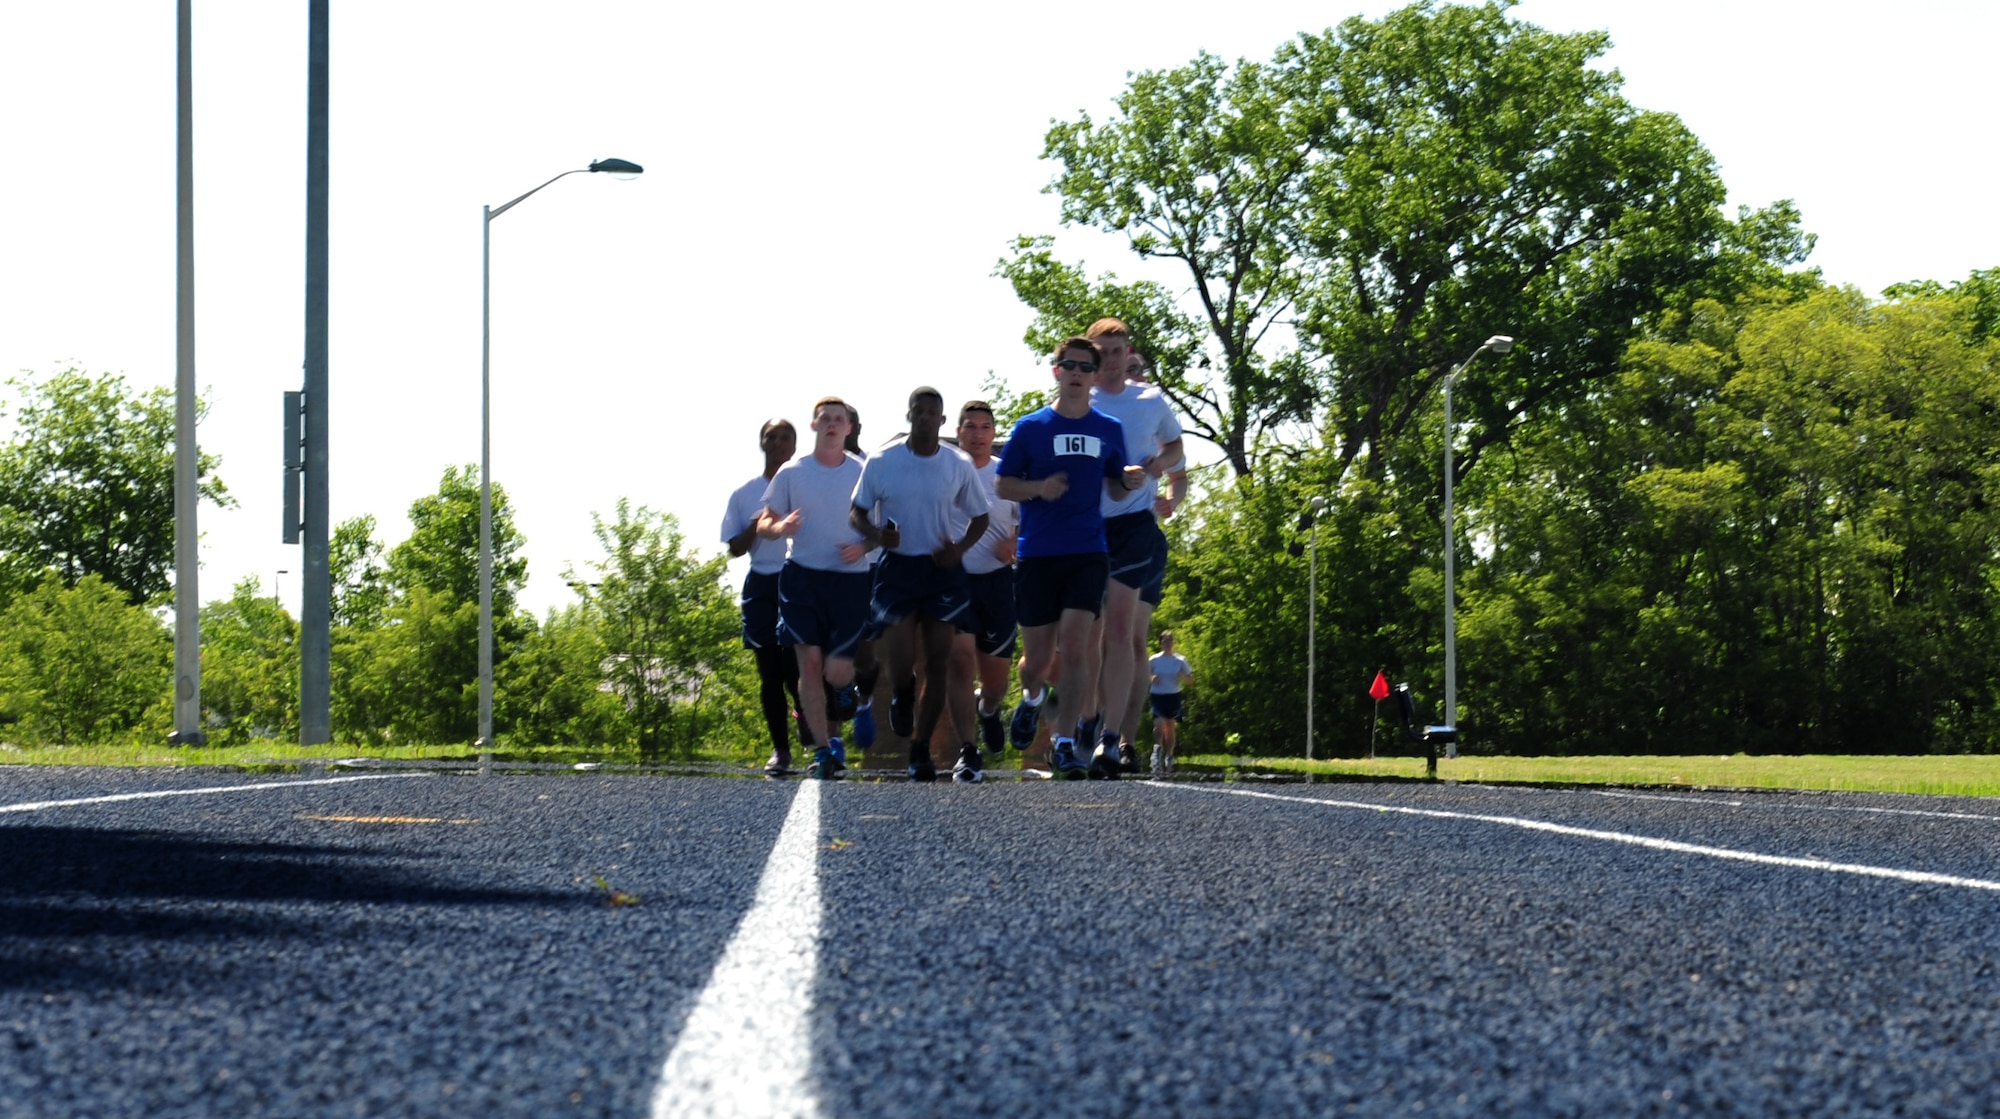 U.S. Air Force Staff Sgt. Brendan Brustad along with his co-workers from the 509th Medical Support Squadron run the final stretch of Brustad’s 161-mile run at Whiteman Air Force Base, Mo., May 21, 2015. Brustad ran approximately 26 miles a day for six days to honor the victims of the 2011 Joplin, Mo. tornado. (U.S. Air Force photo by Senior Airman Joel Pfiester/Released)